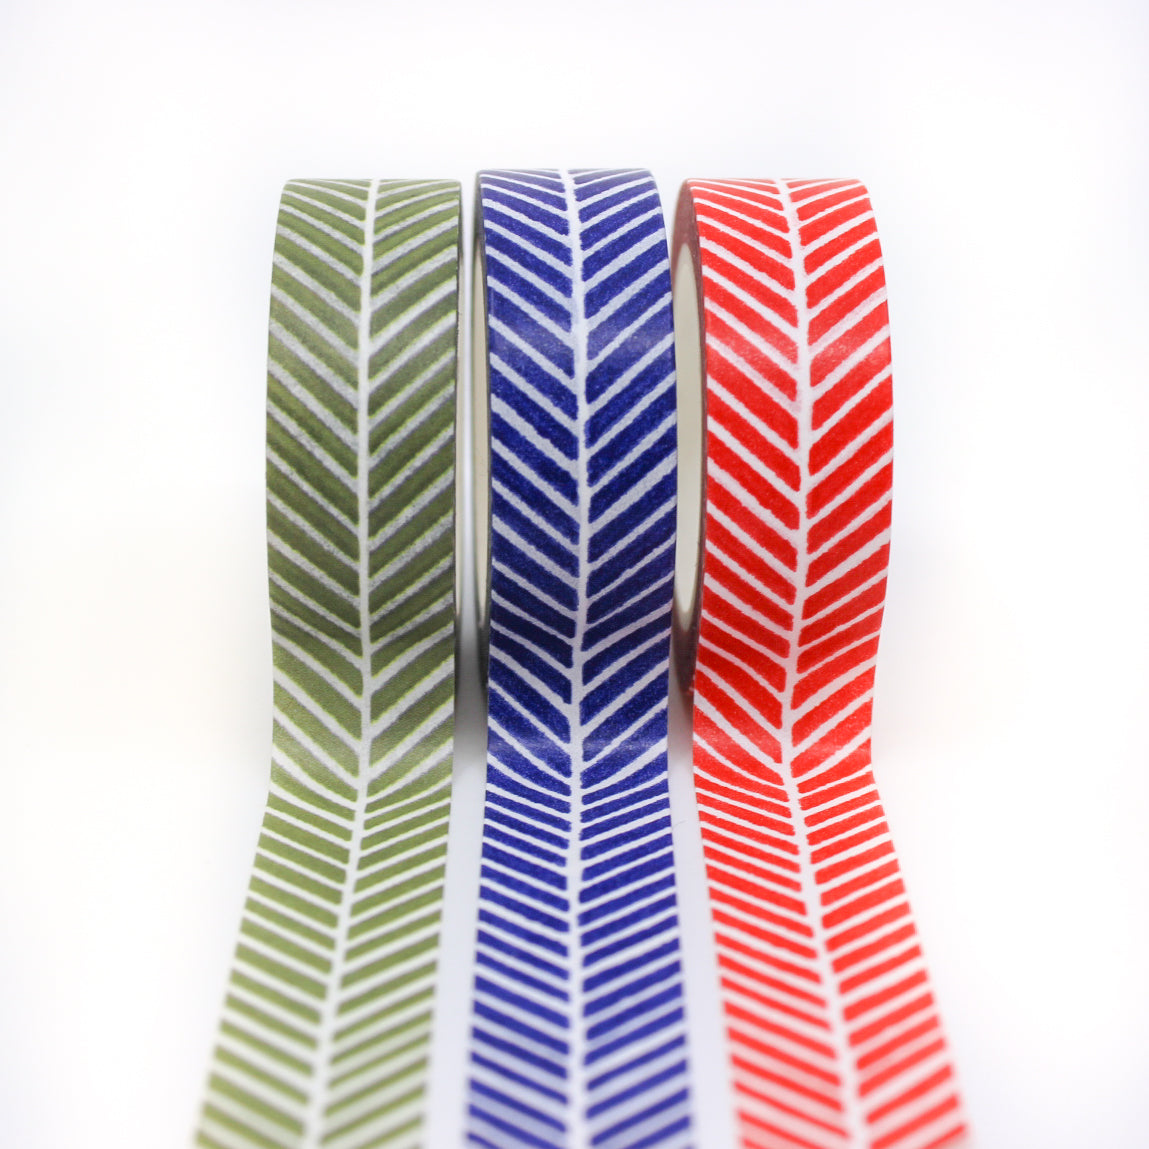 Elevate your projects with our Colorful Classic Herringbone Pattern Washi Tape, available in your choice of red, blue, or green. This tape adds a timeless and vibrant herringbone design to your creations. this tape is from Beve and sold at BBB Supplies Craft Shop.